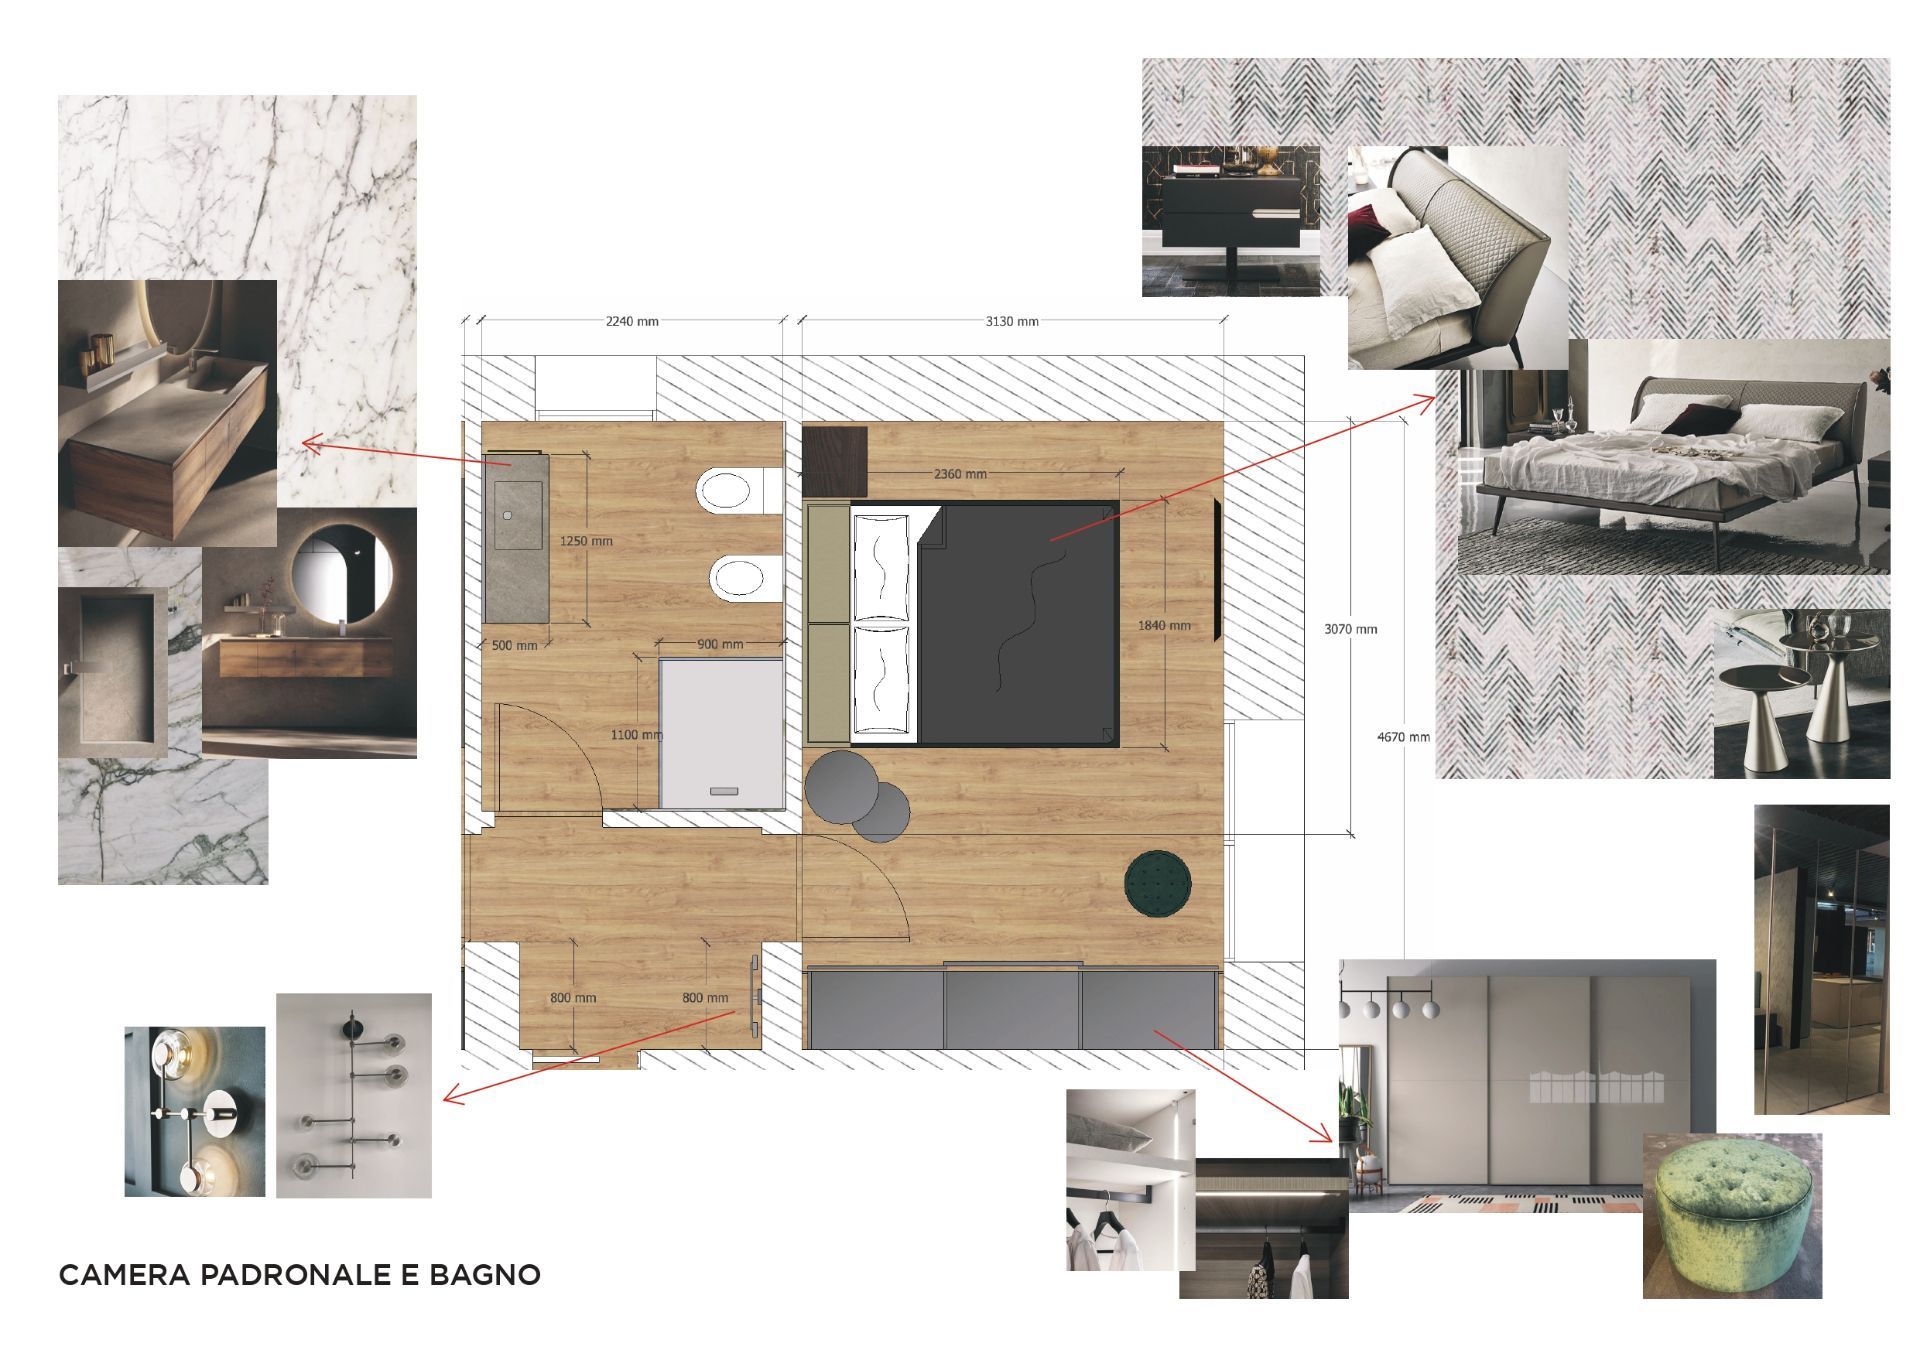 MOODBOARD – 2D FLOORPLAN WITH TEXTURE AND IMAGES